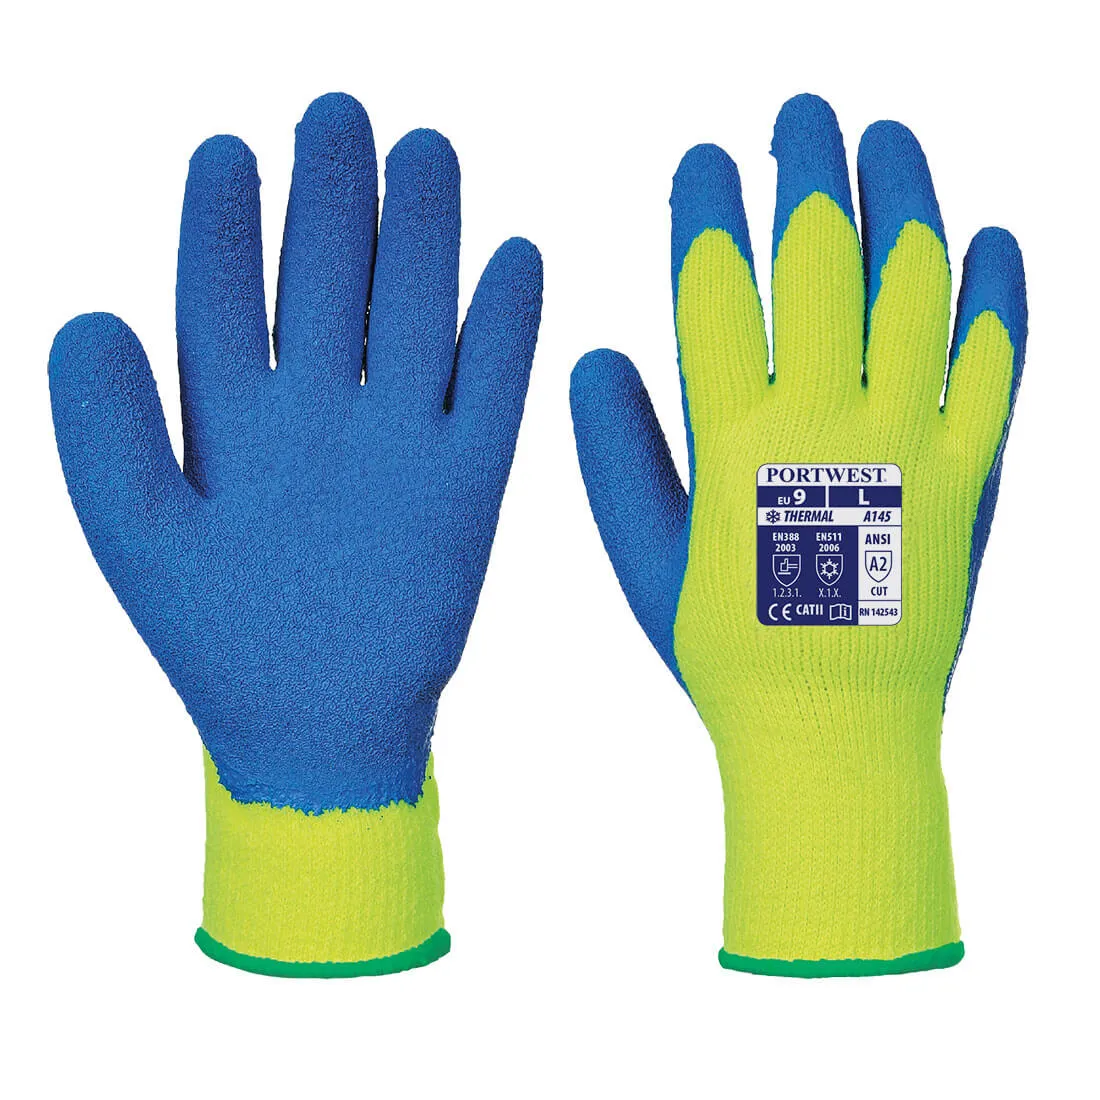 Portwest Latex Grip Gloves for Cold Conditions - Yellow / Blue, 2XL